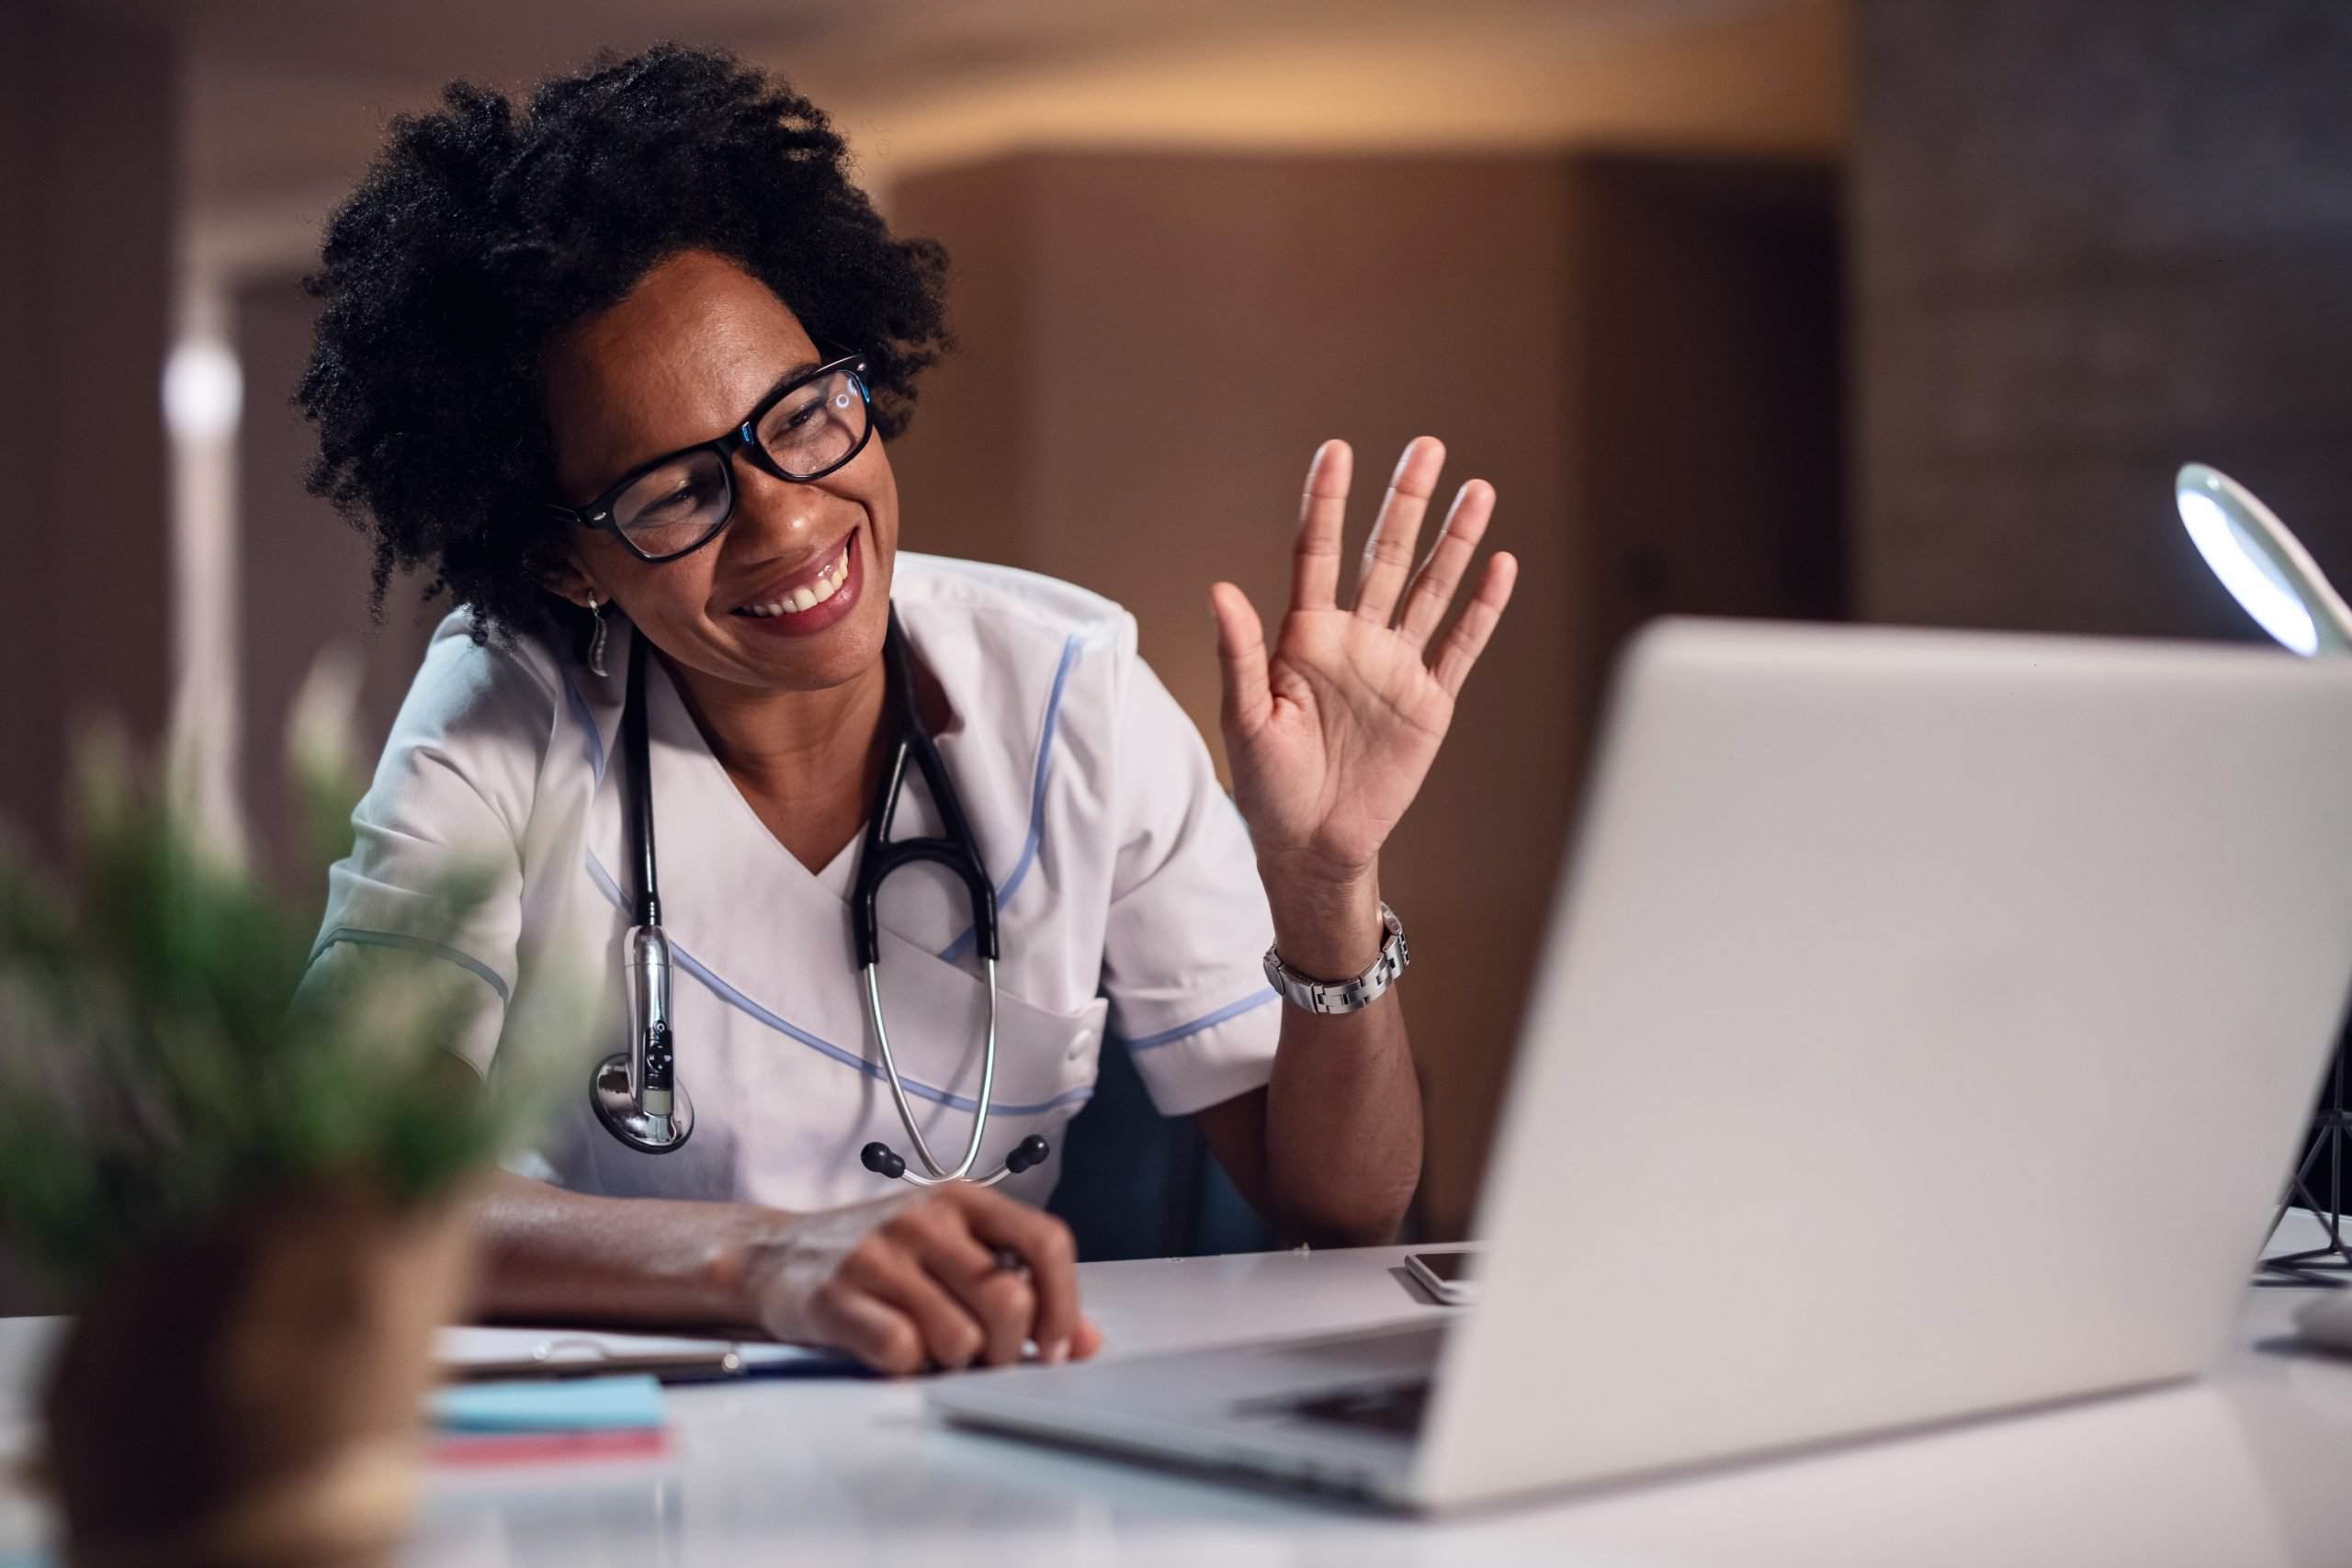 A Step-by-Step Guide to Launching Telehealth at Your Practice